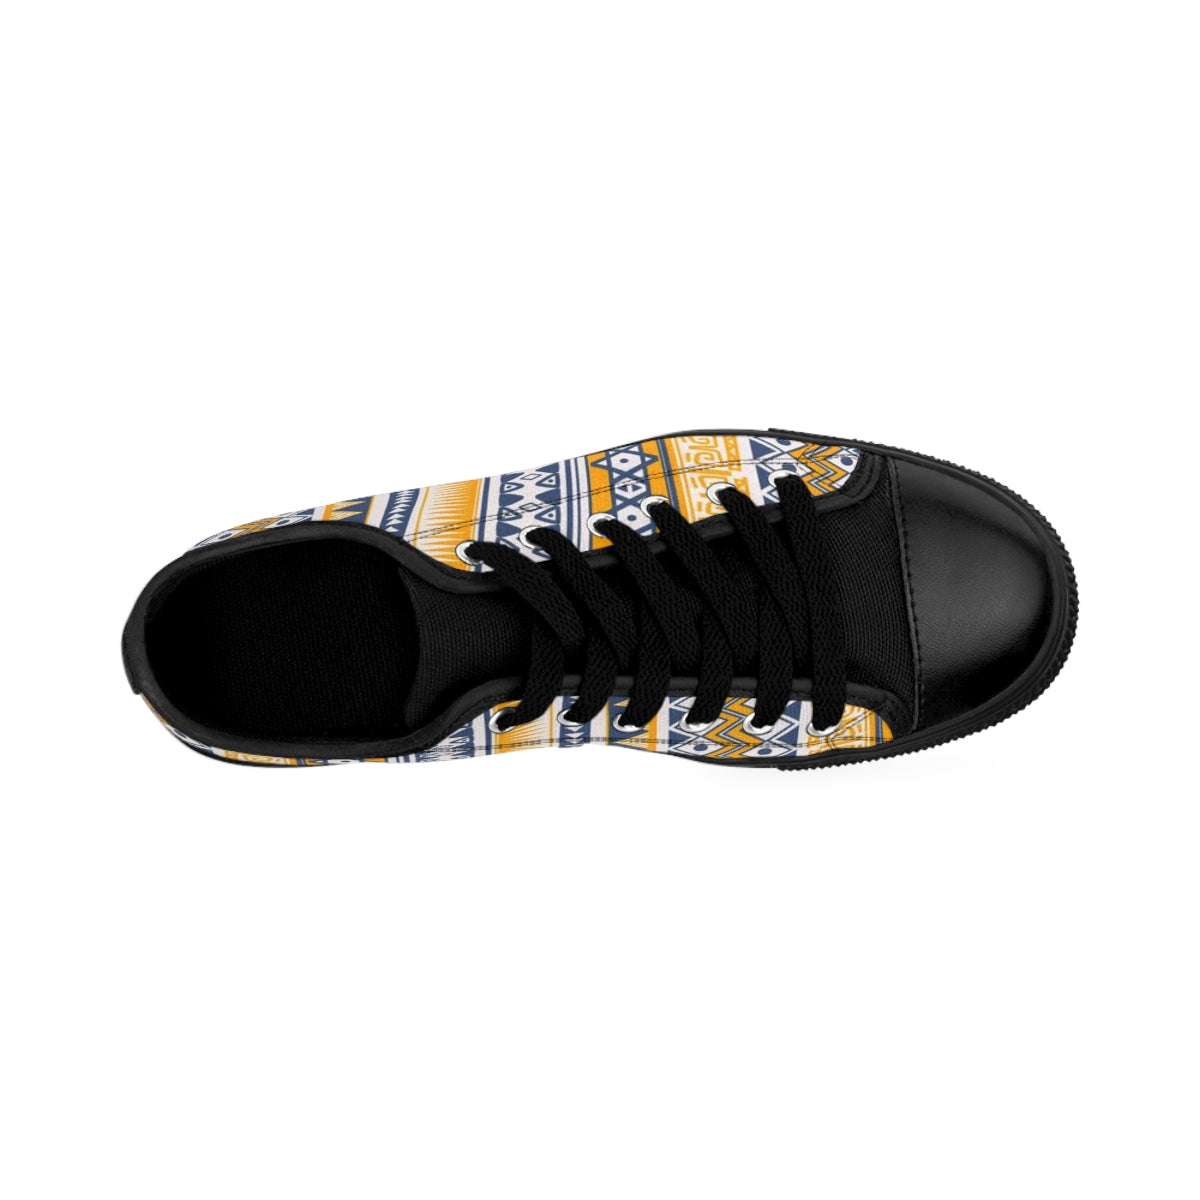 African Print Yellow Low Top Sneakers for Women